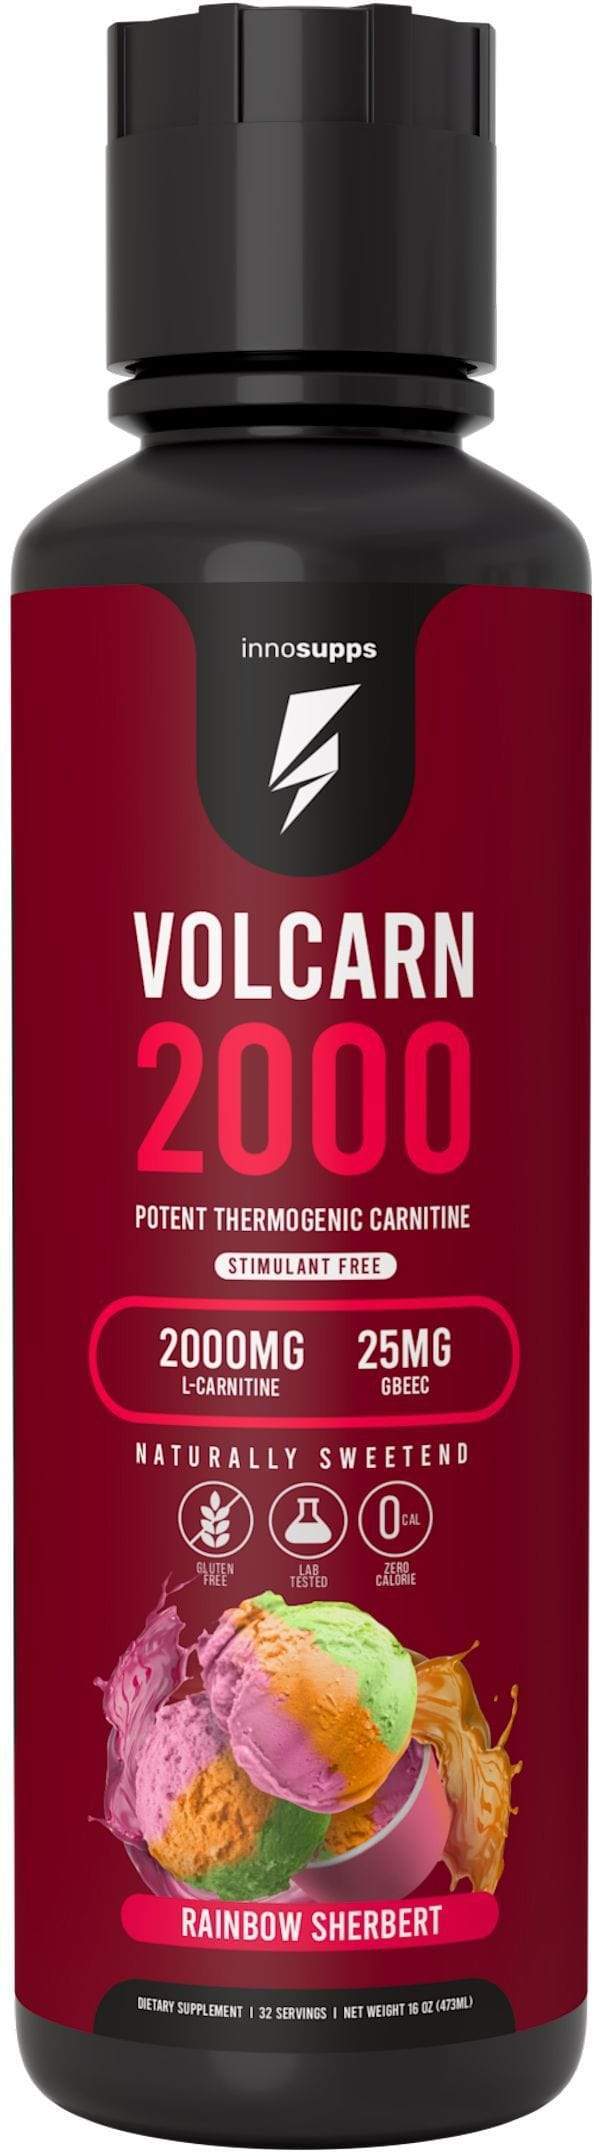 Inno Supps Carnitine Inno Supps Volcarn 2000 32 servings